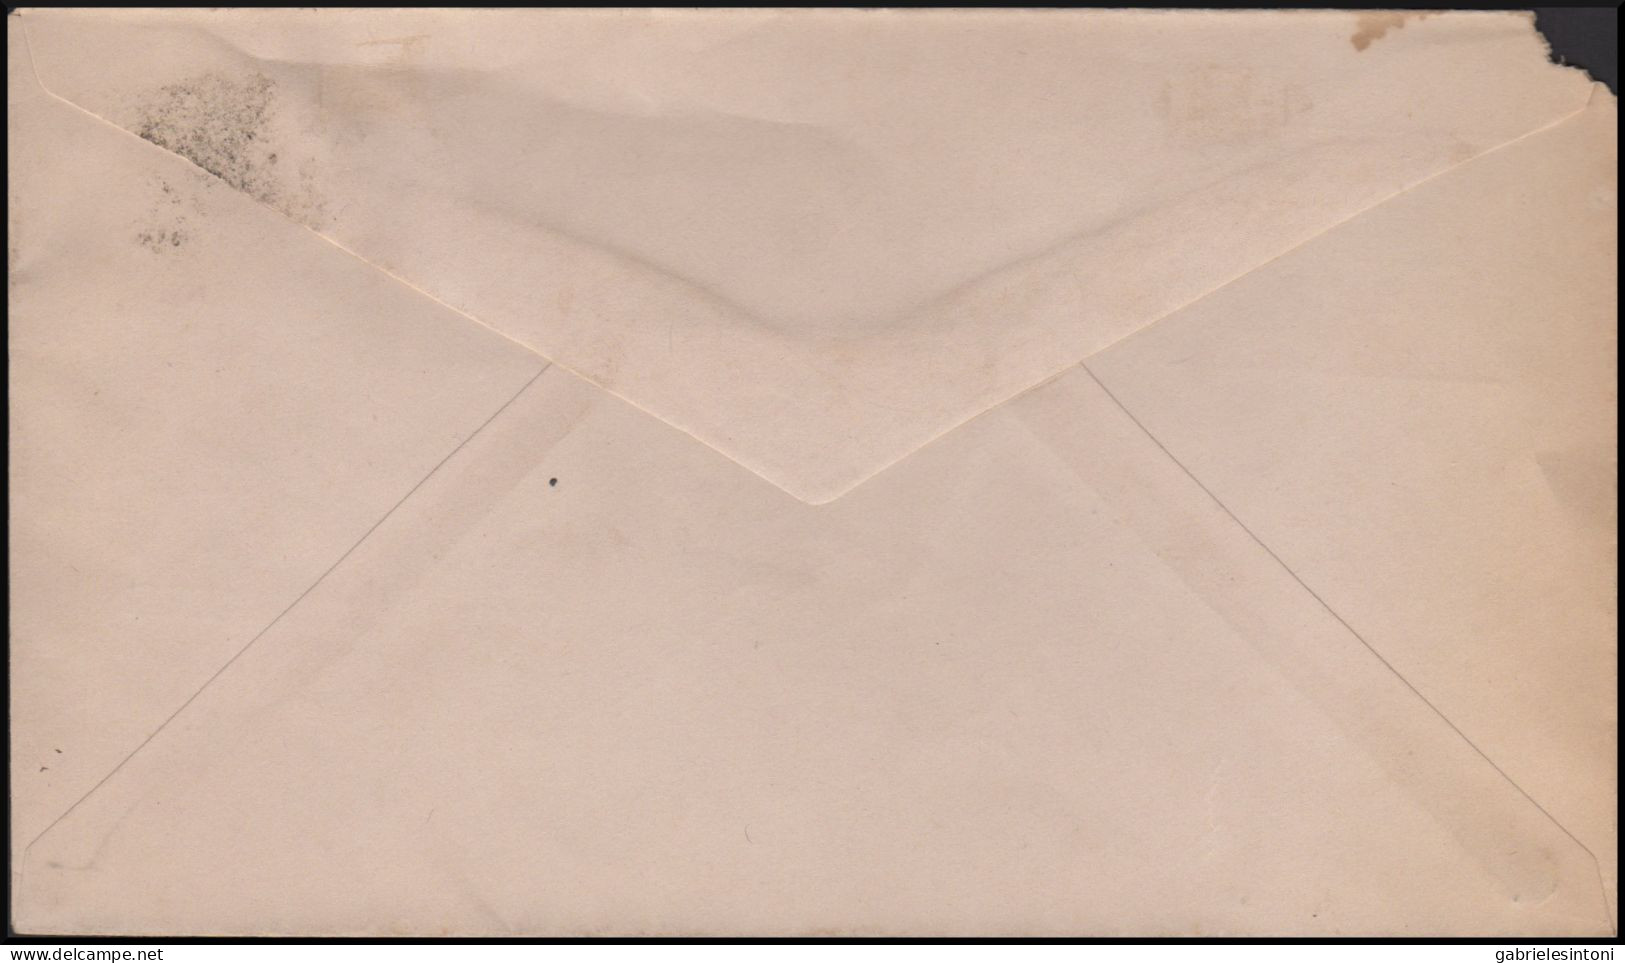 PM 11 - 1945 - Military Post. Three Air Mail Letter Sent From Burma To Rangoon. Japanese Occupation. - Japanese Occupation